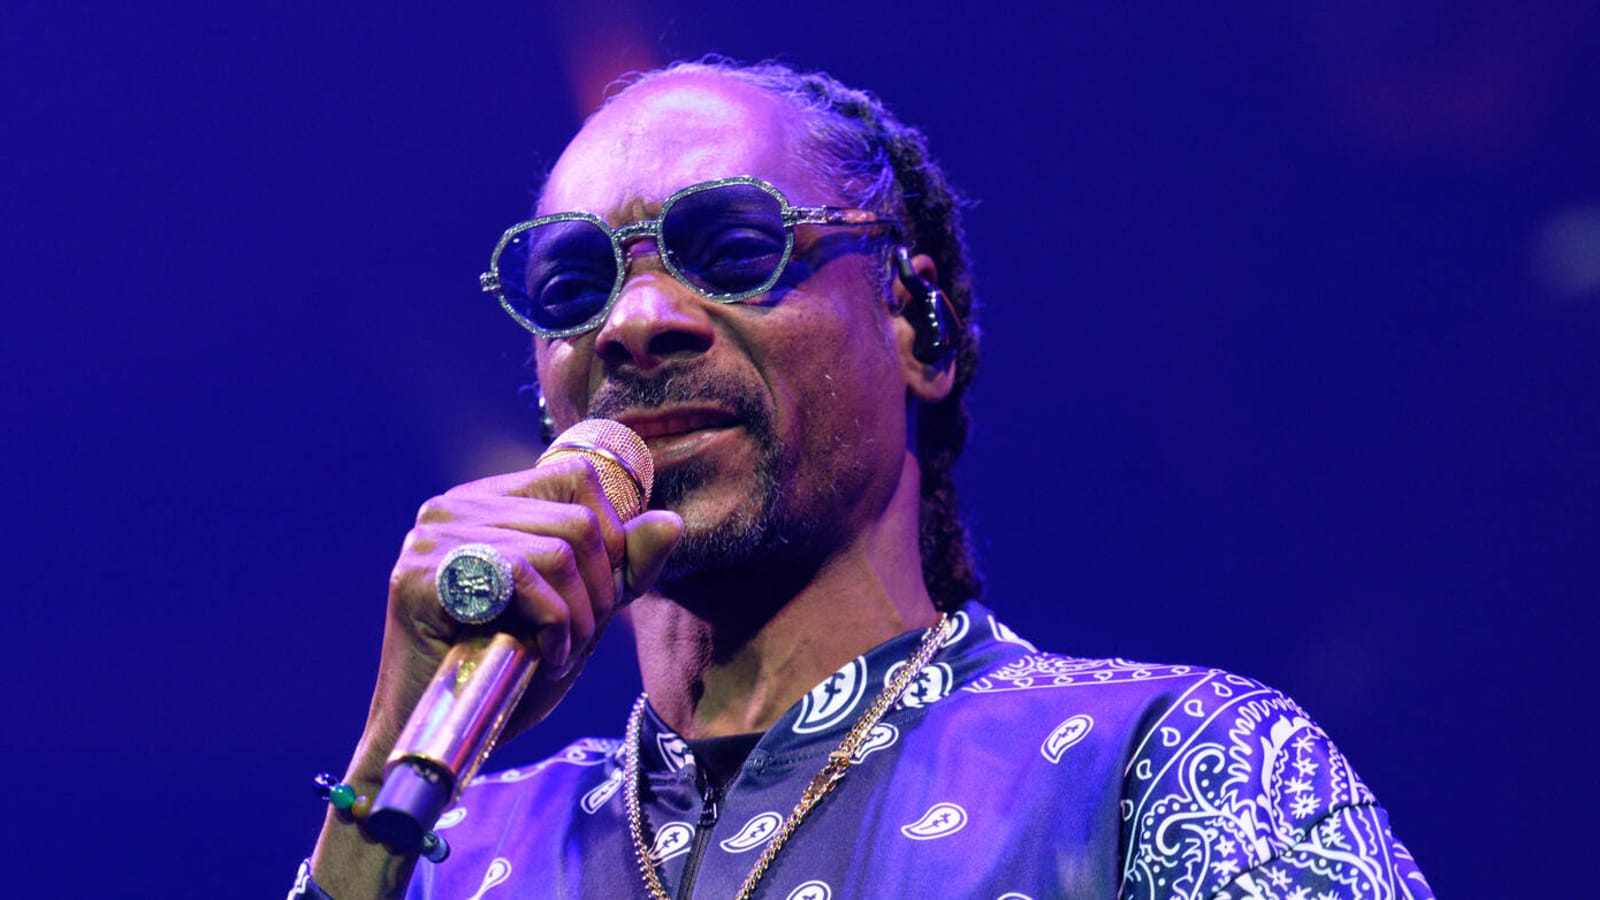 NBC adds Snoop Dogg to Summer Olympics coverage